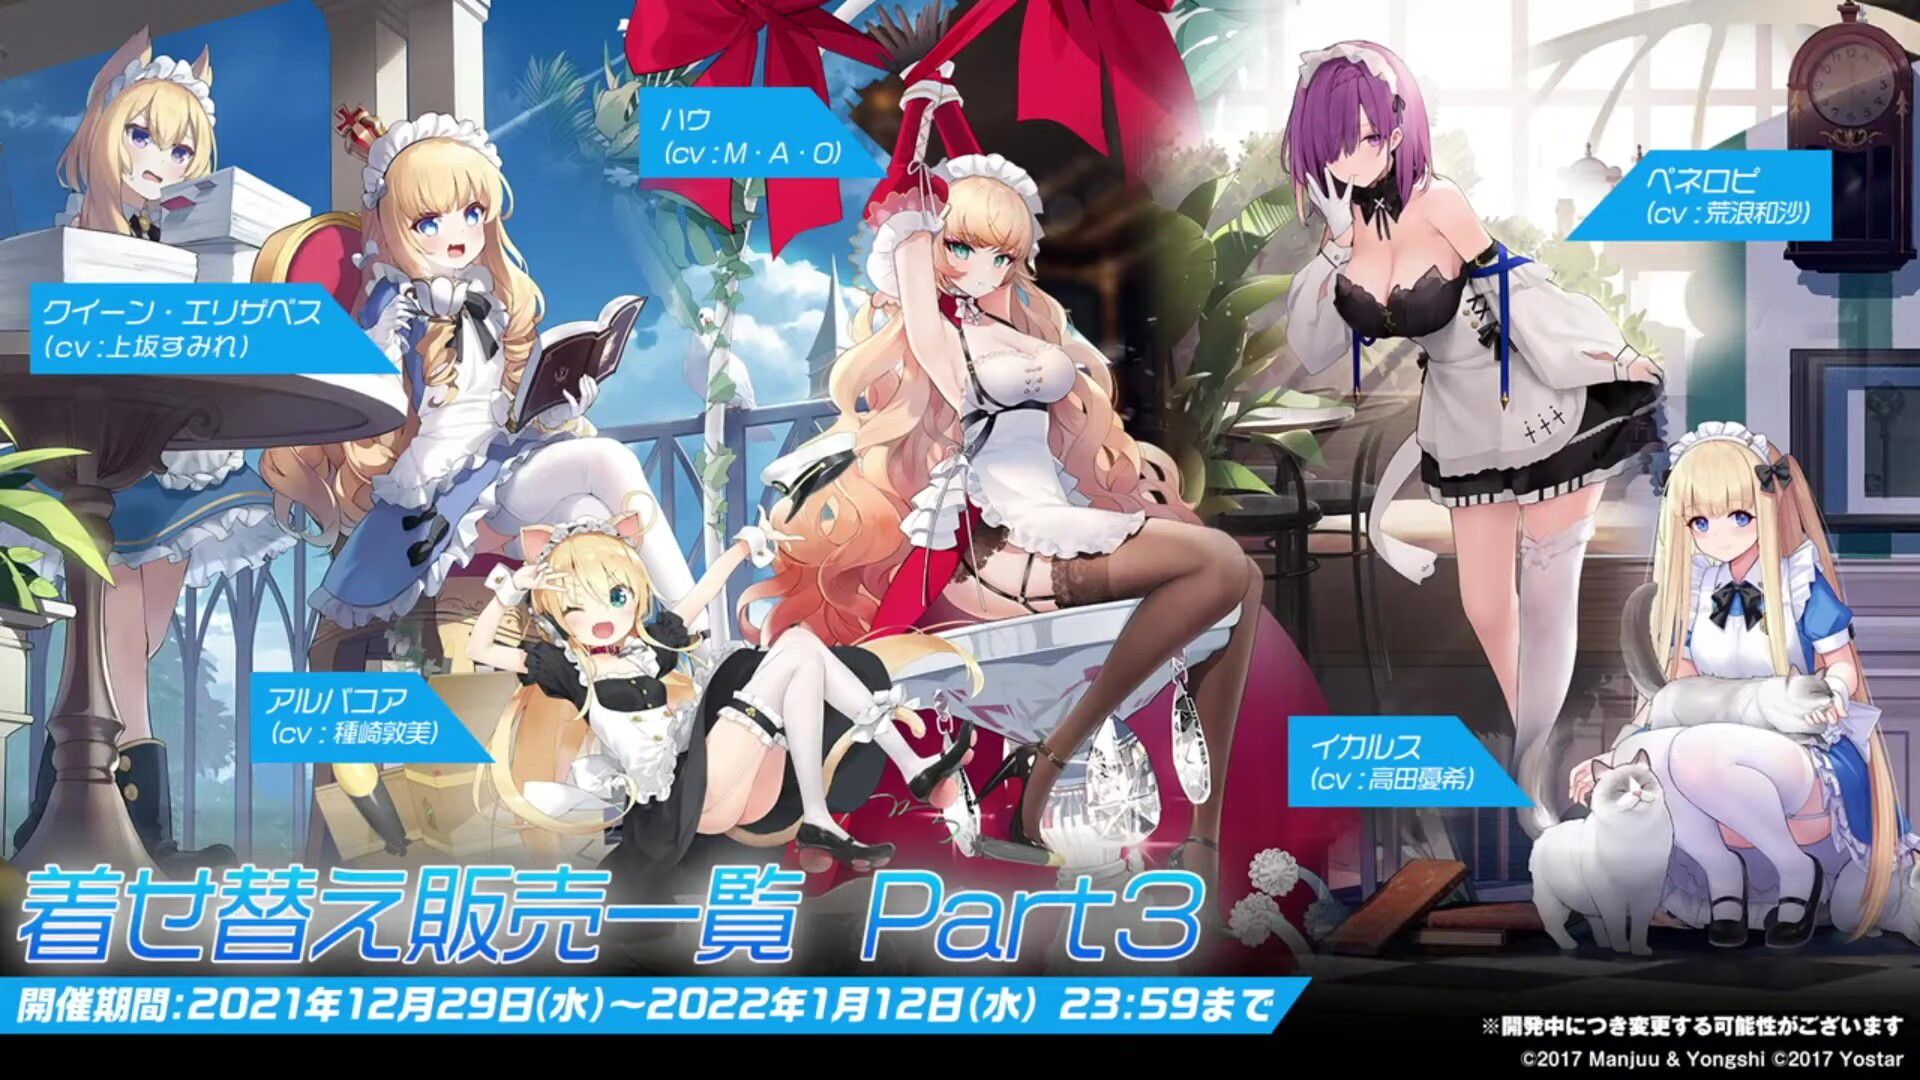 Erotic costumes such as "Azur Lane" erotic new character, whipmuchiro Santa and whipmuchi erotic maid clothes 32